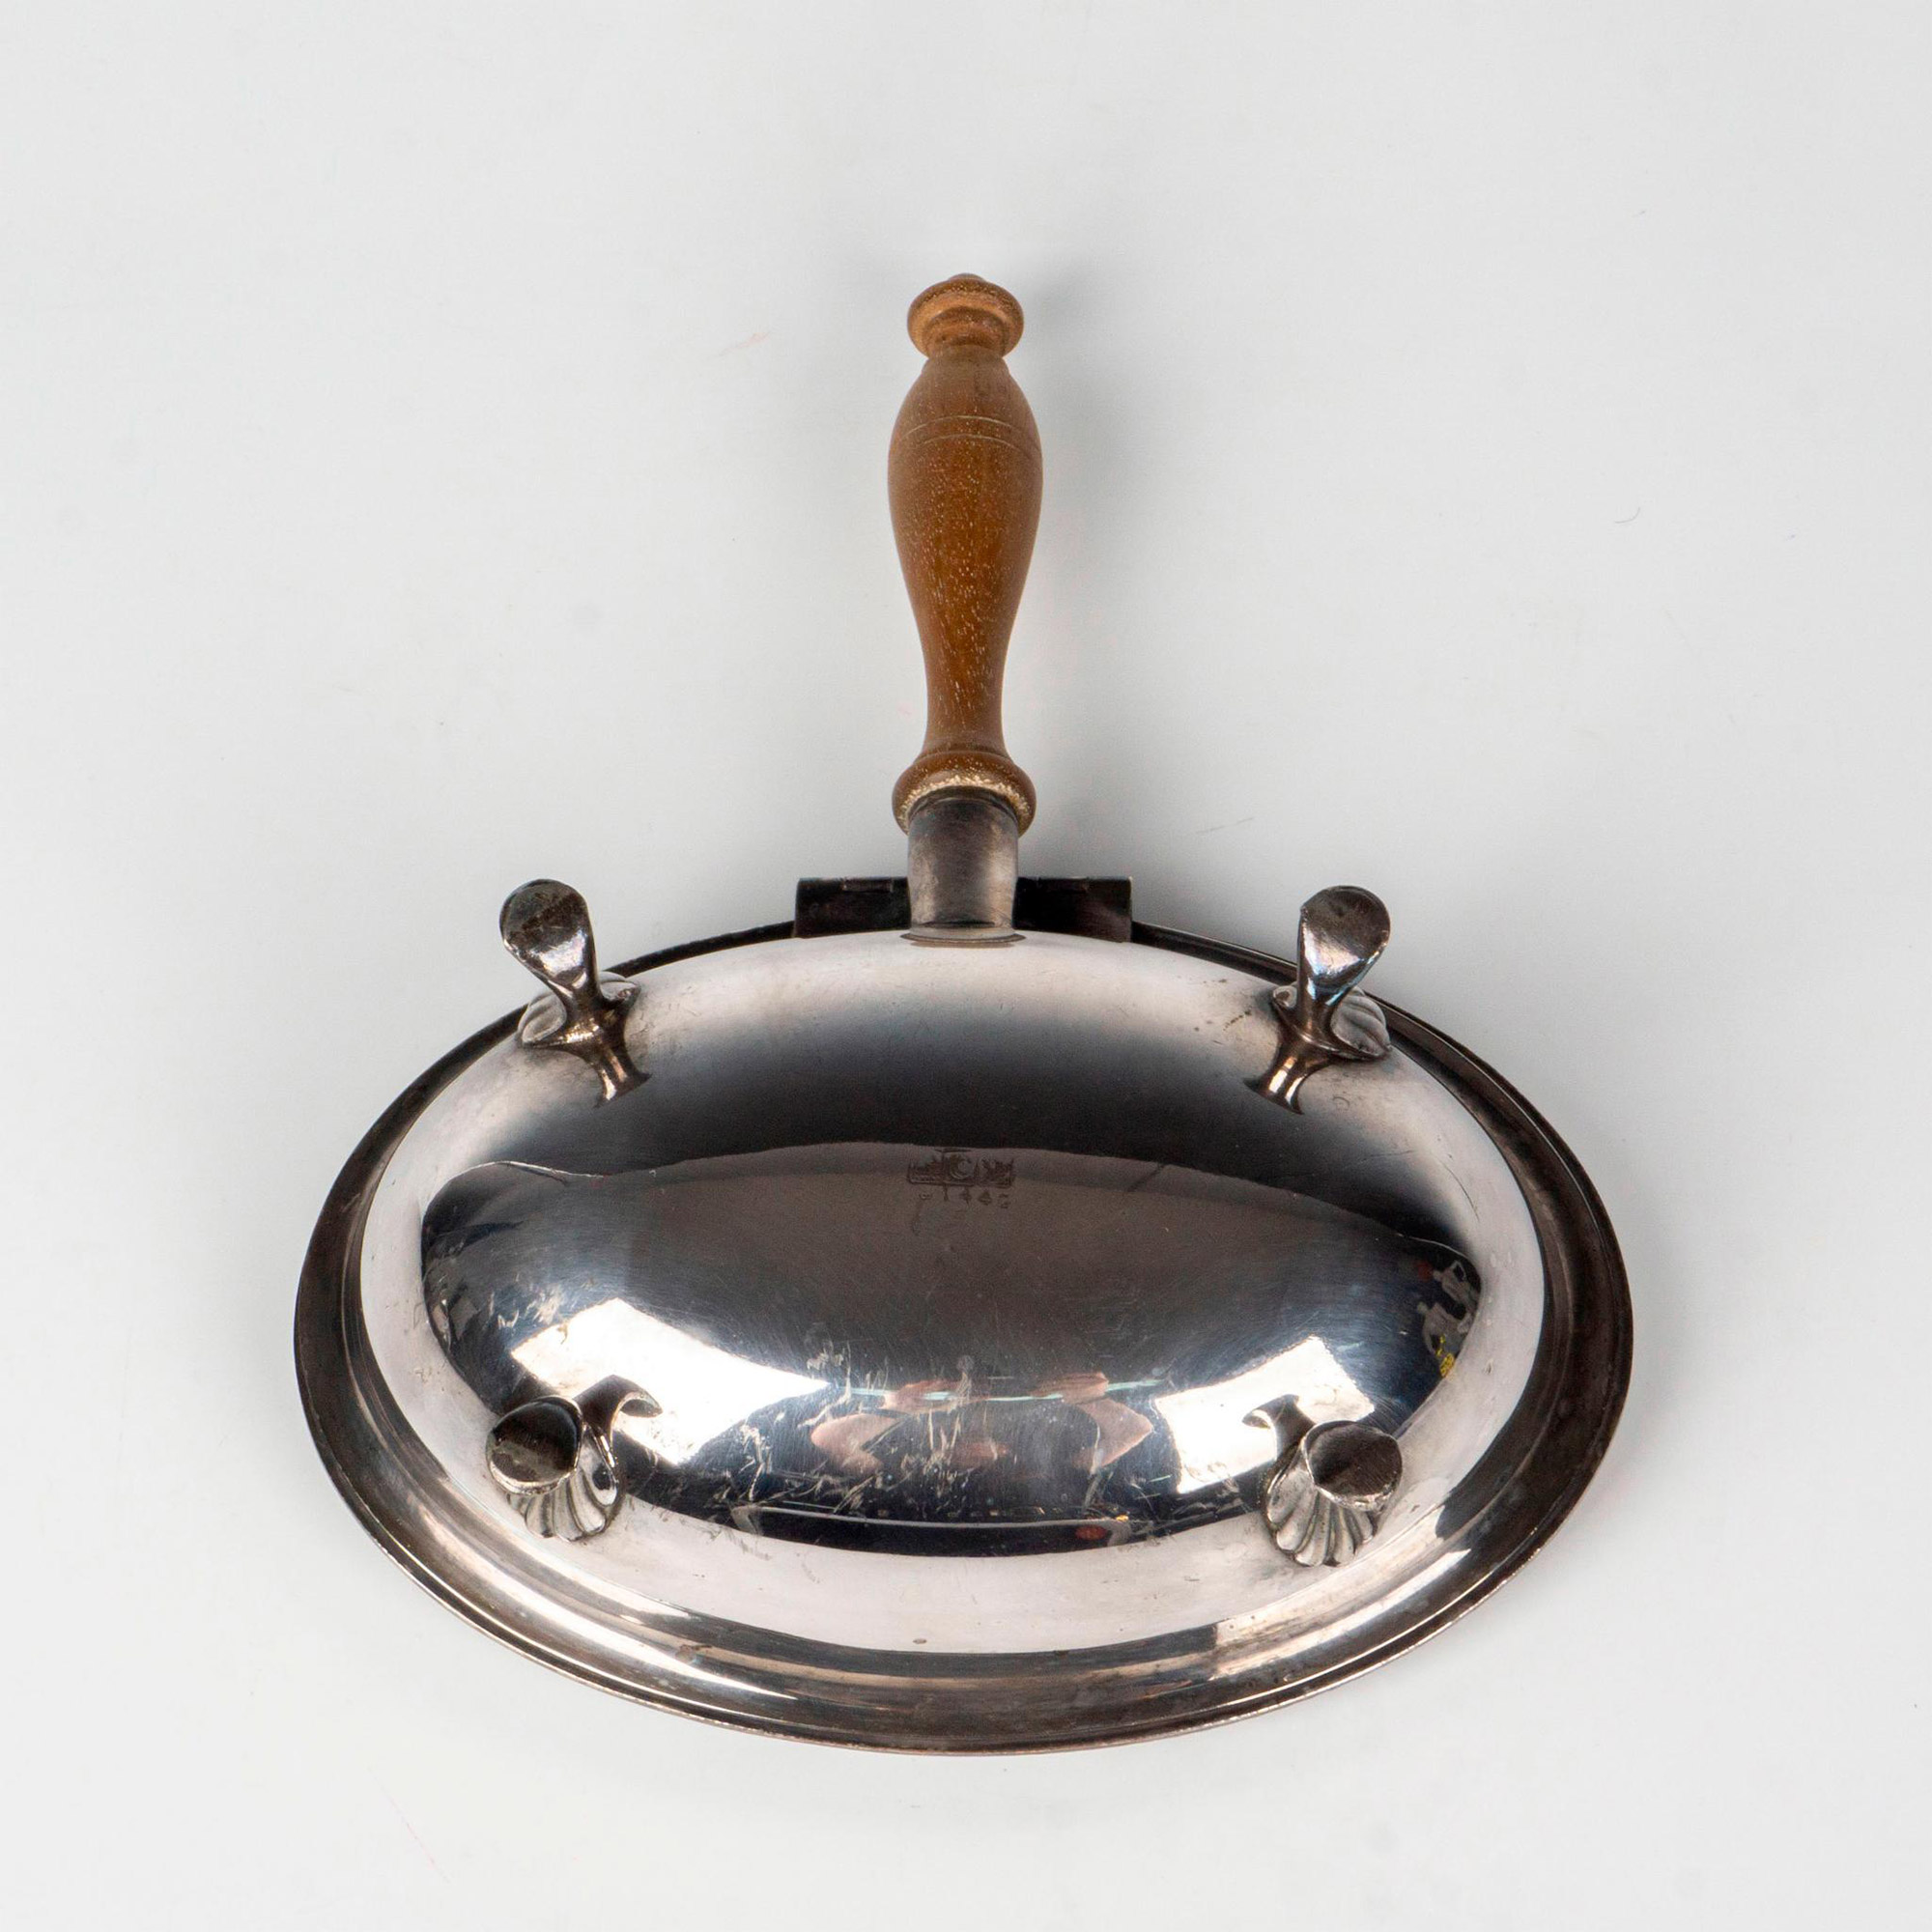 Crescent Silverware Mfg. Co. Silent Butler Serving Dish - Image 3 of 3